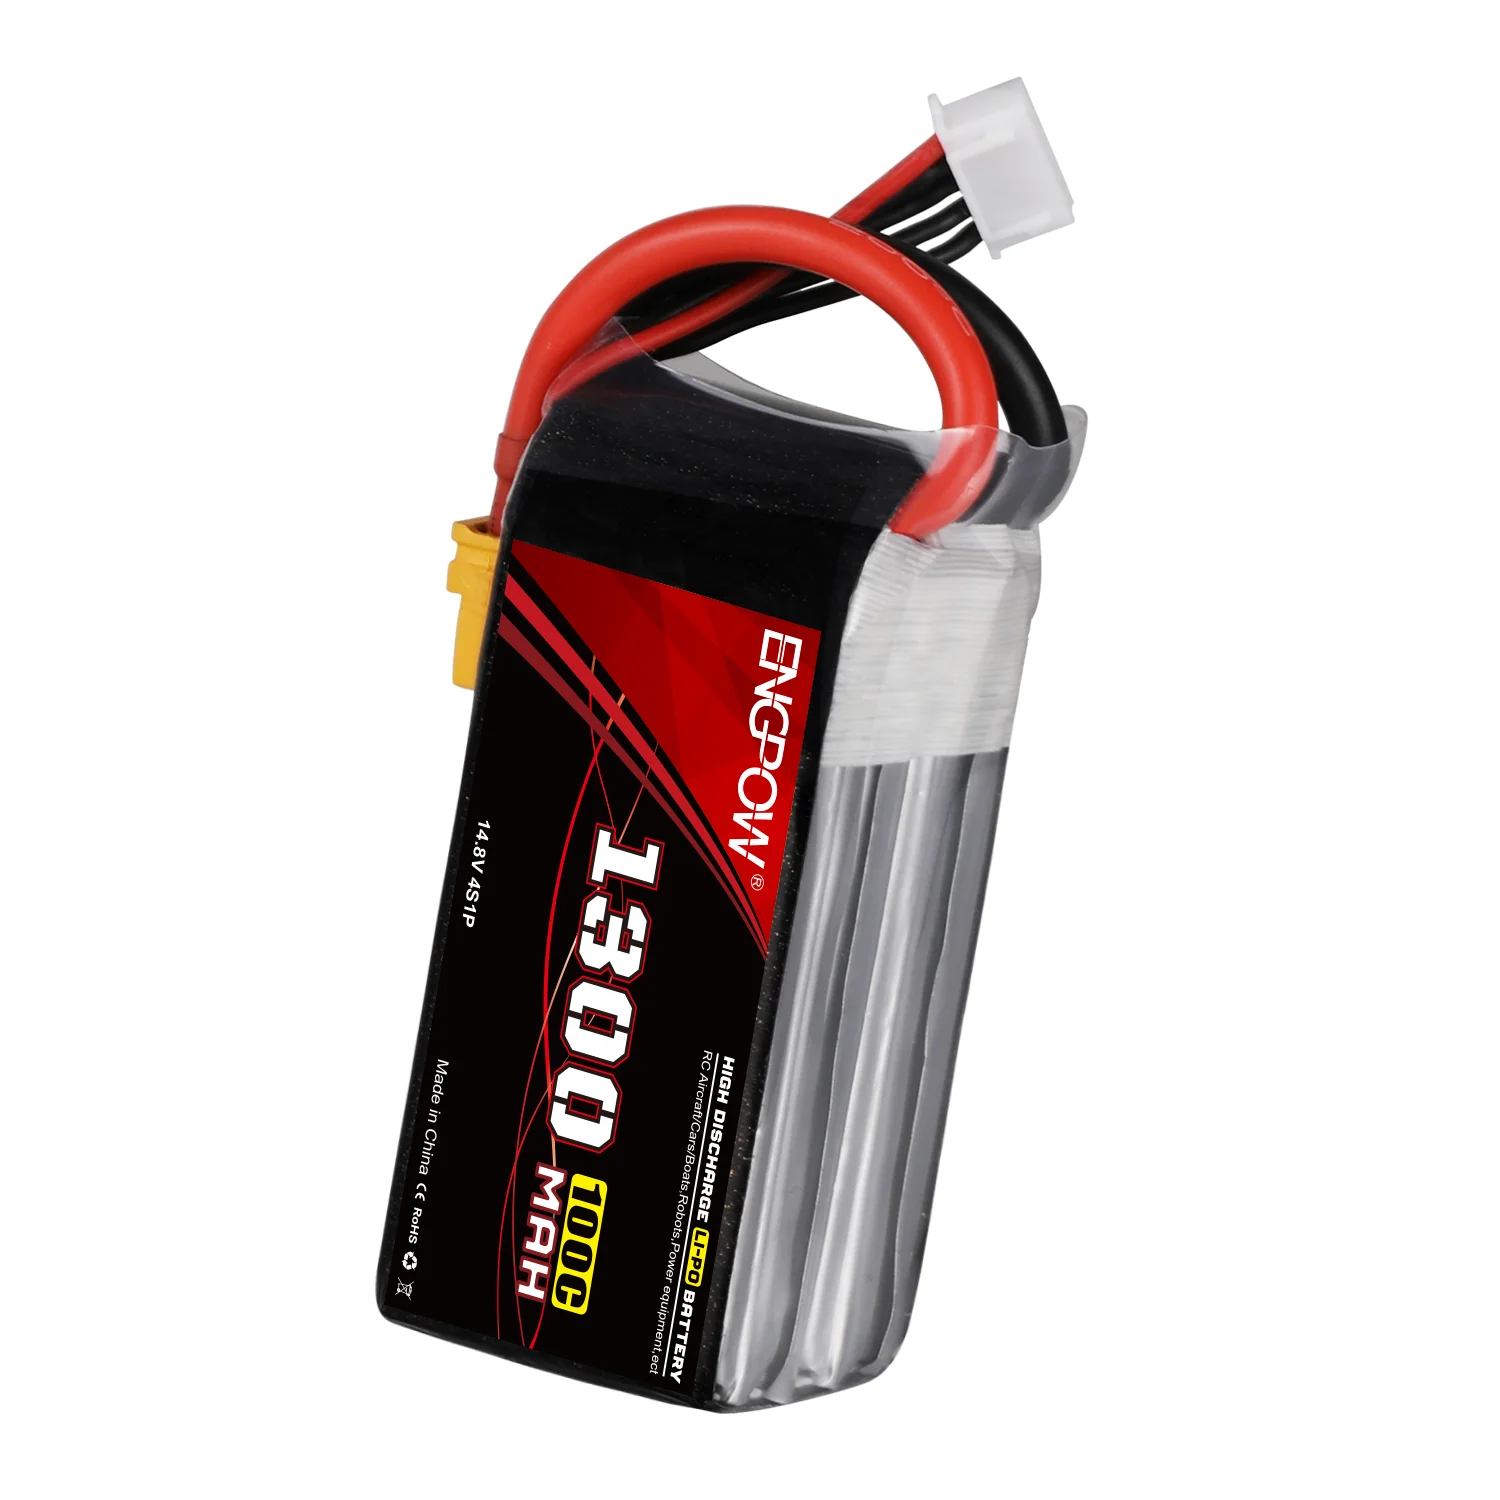 LiPo Battery 14.8V 1300mAh 100C 4S1P Recharge Lithium Battery For Rc Hobby Car/Helicopter